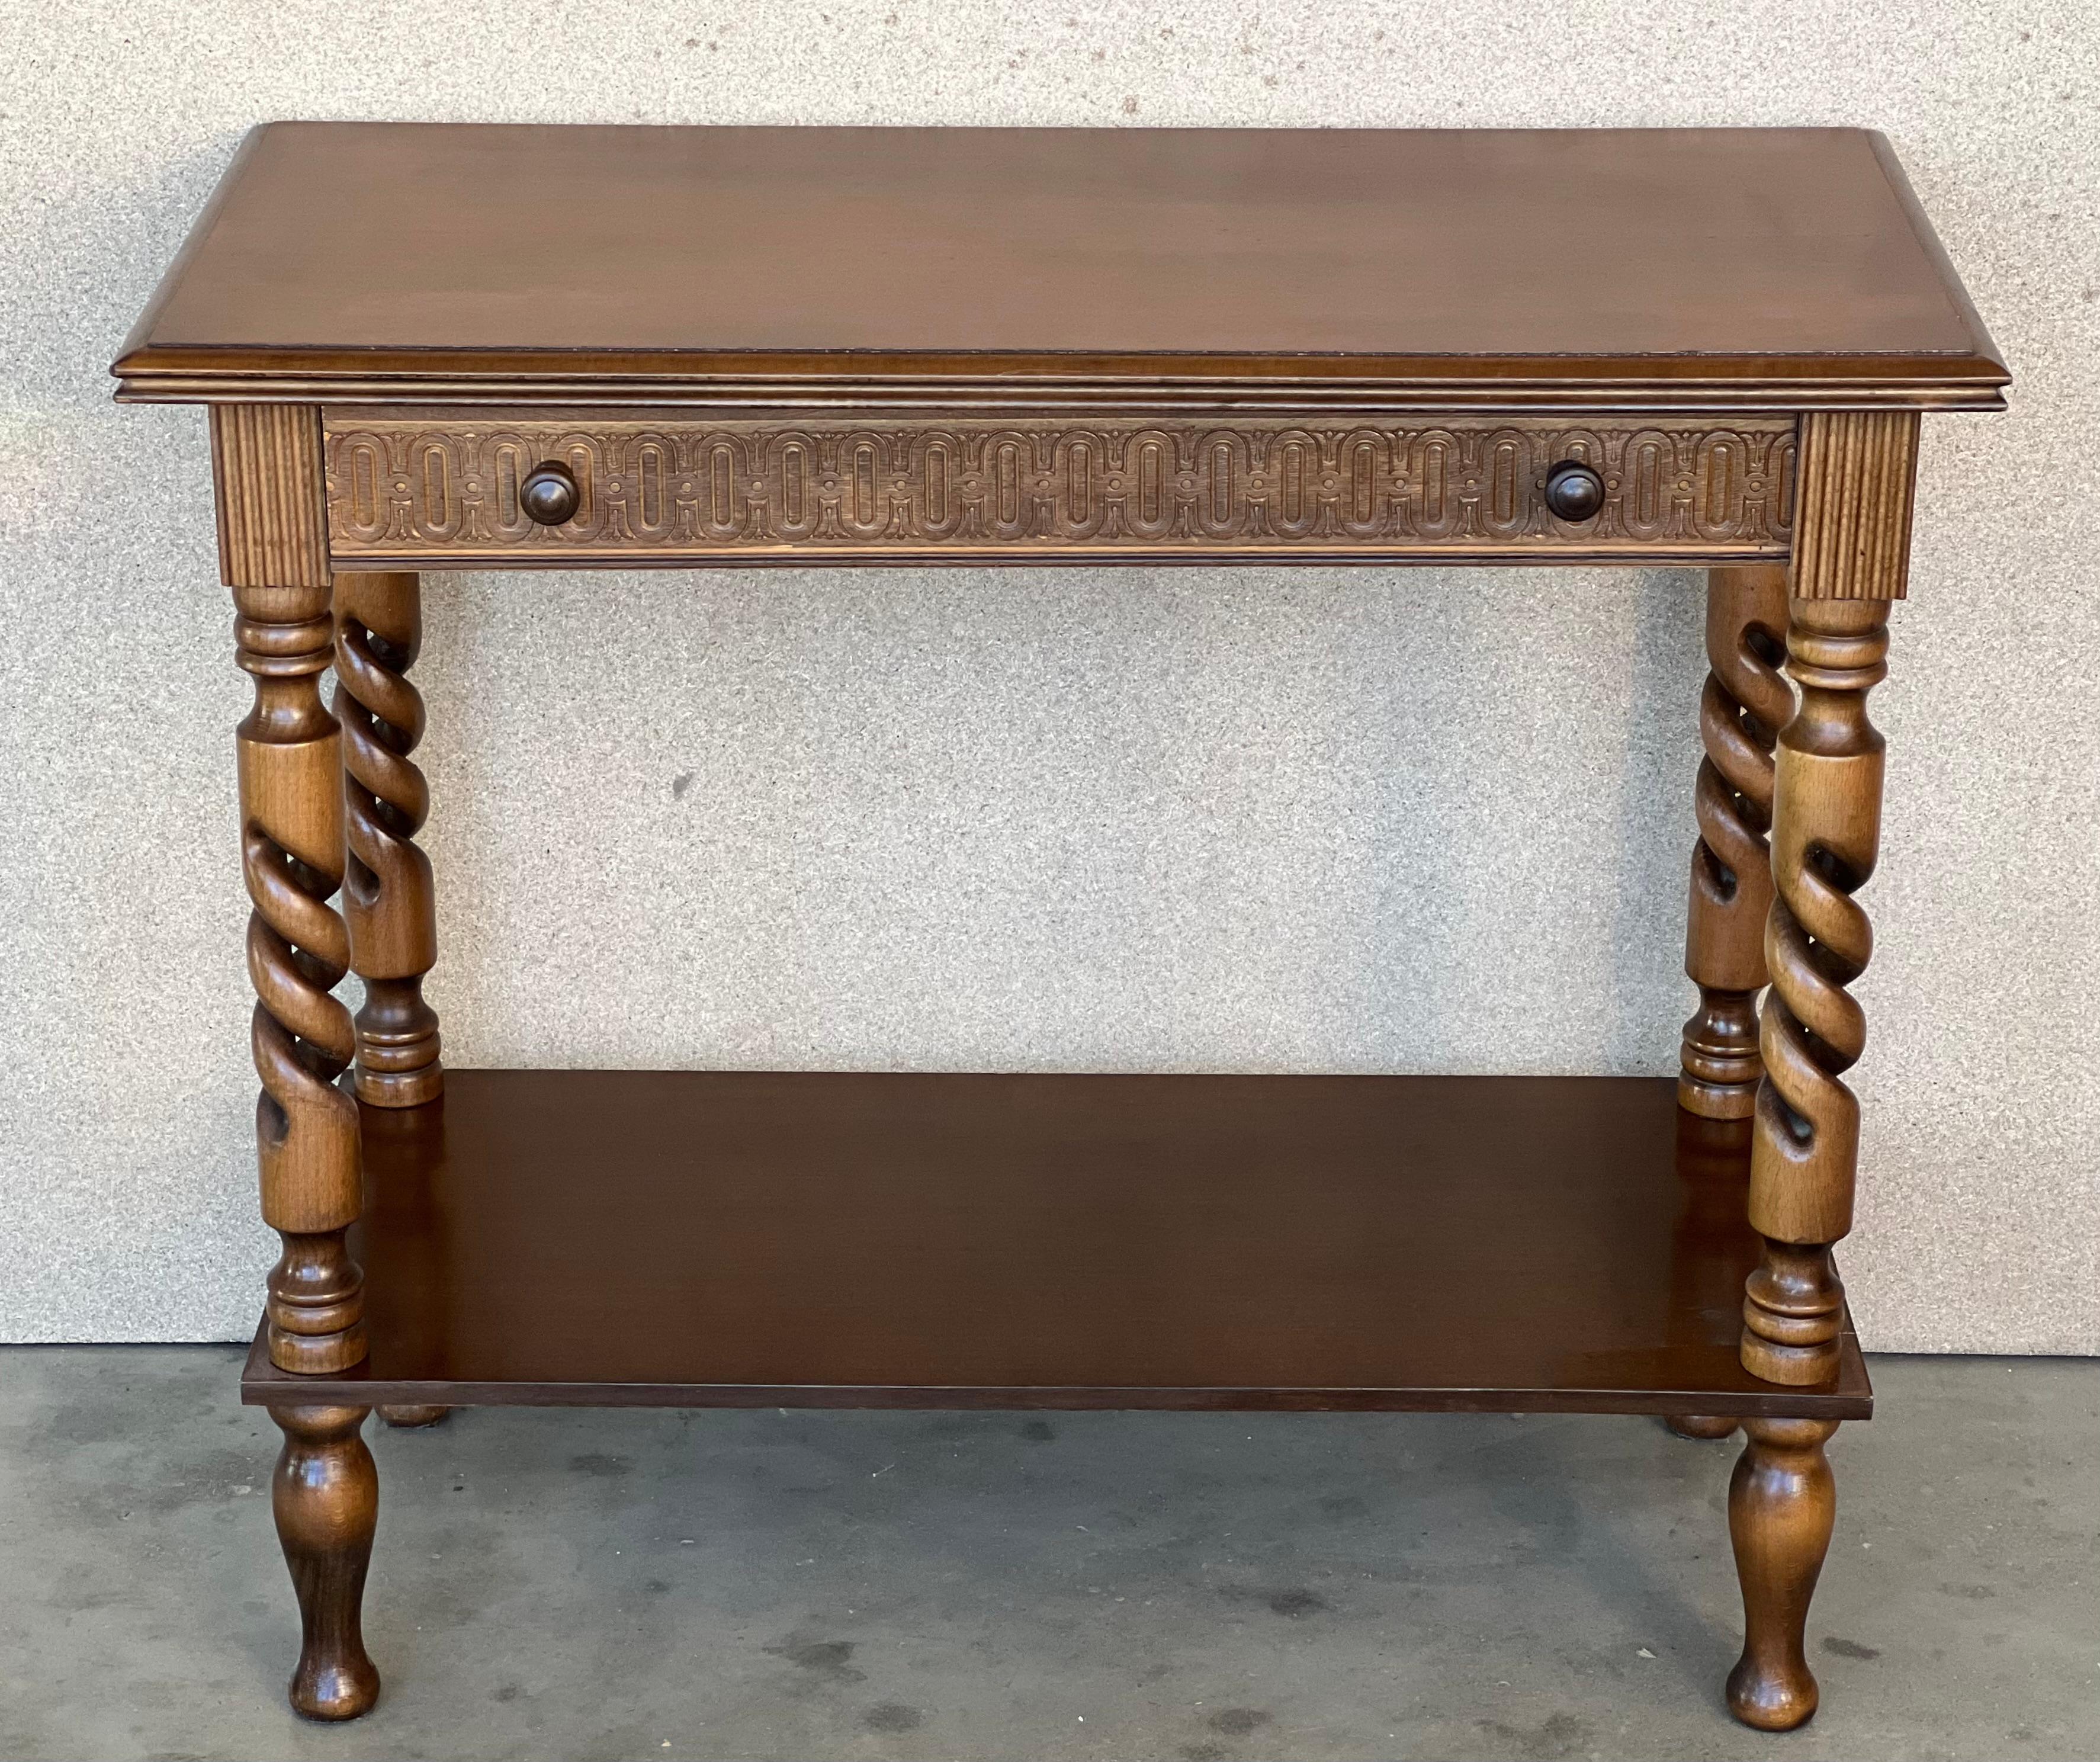 A 20th century walnut console table with a slab top above a frieze with one drawer with front decorated with carved floral motifs and incised with additional decoration and a double pull in drawer. The table is supported on a hand carved base with